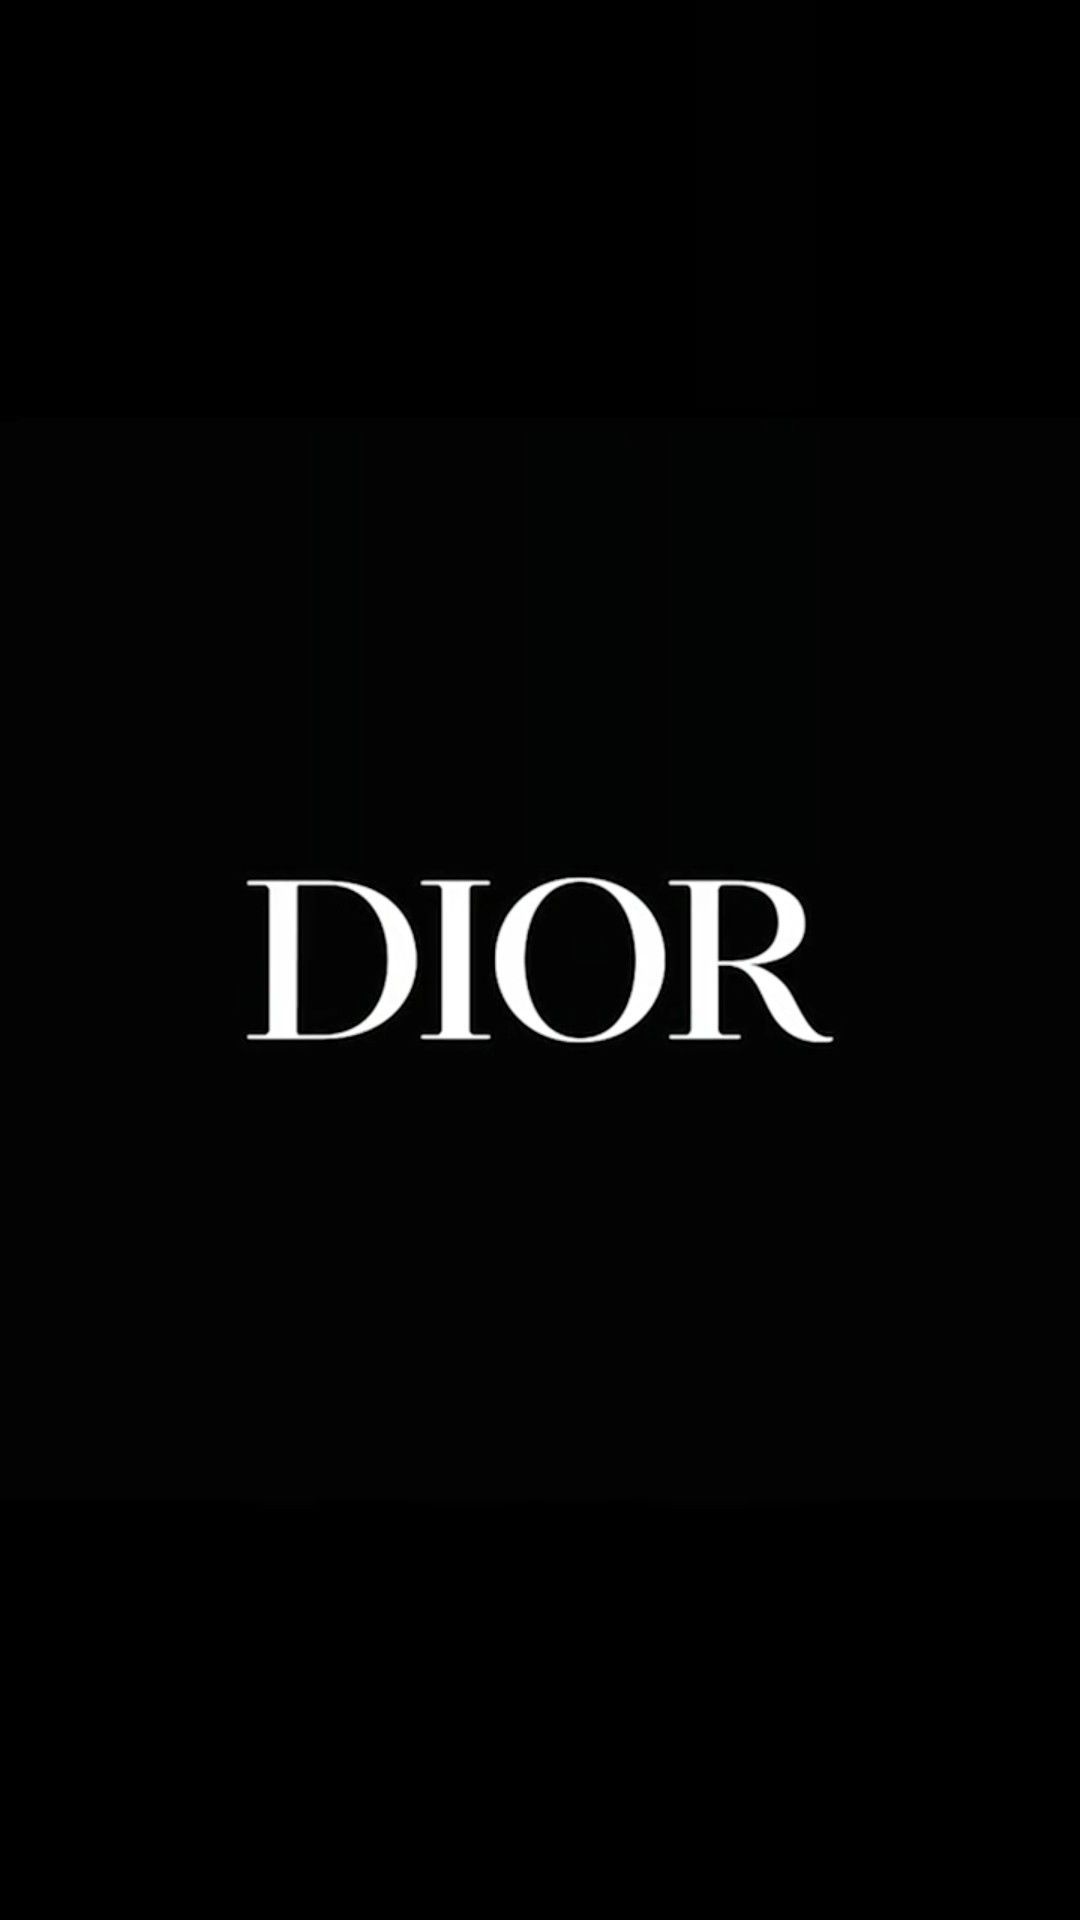 ❁ Dior Wallpaper ❁. Classy wallpaper, Black and white photo wall, Photo wall collage